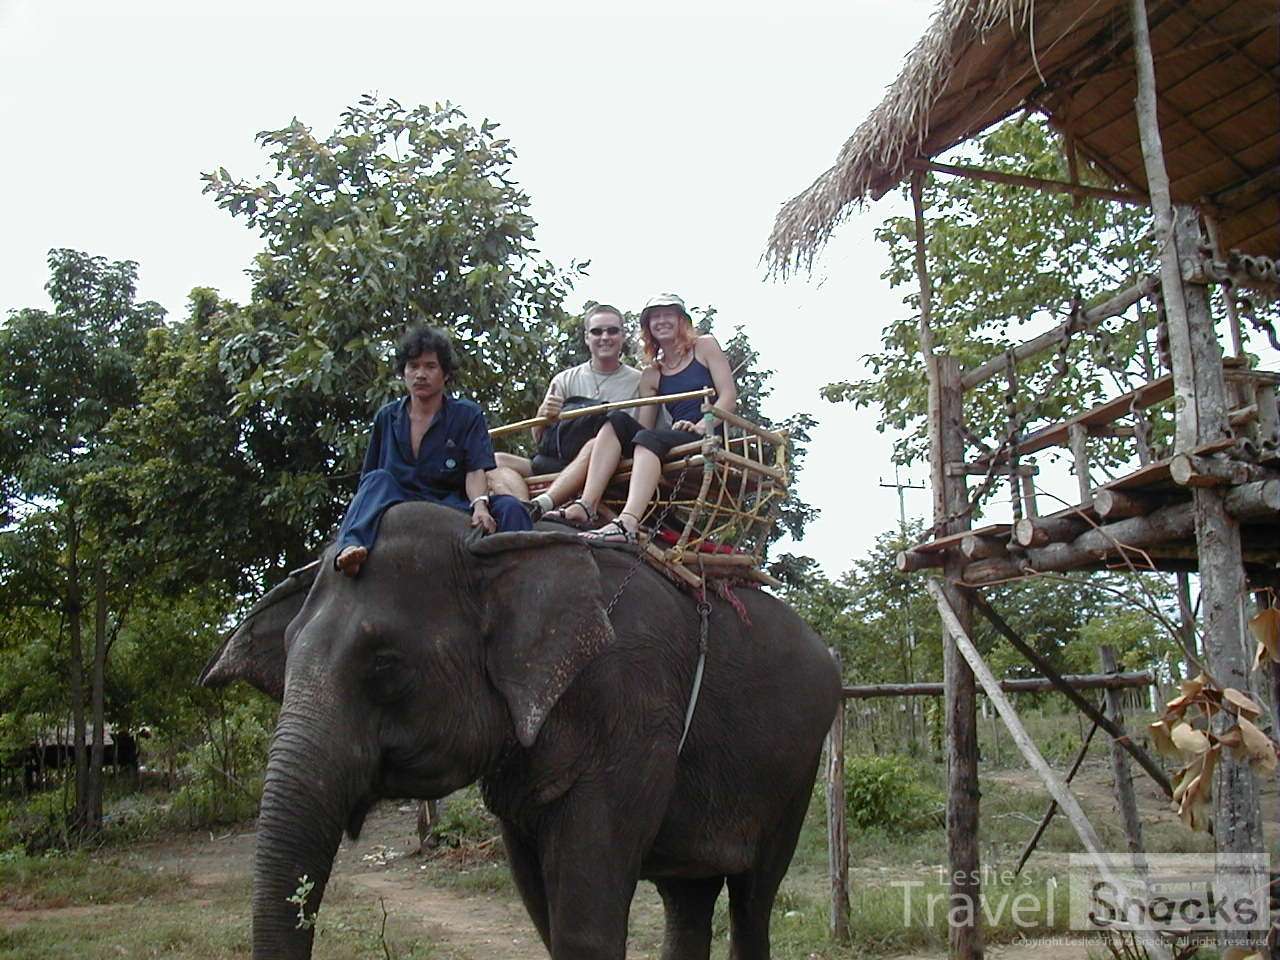 I was rather ignorant then and yes, I rode an elephant. I don't condone this now. There are very few places that treat elephants properly.